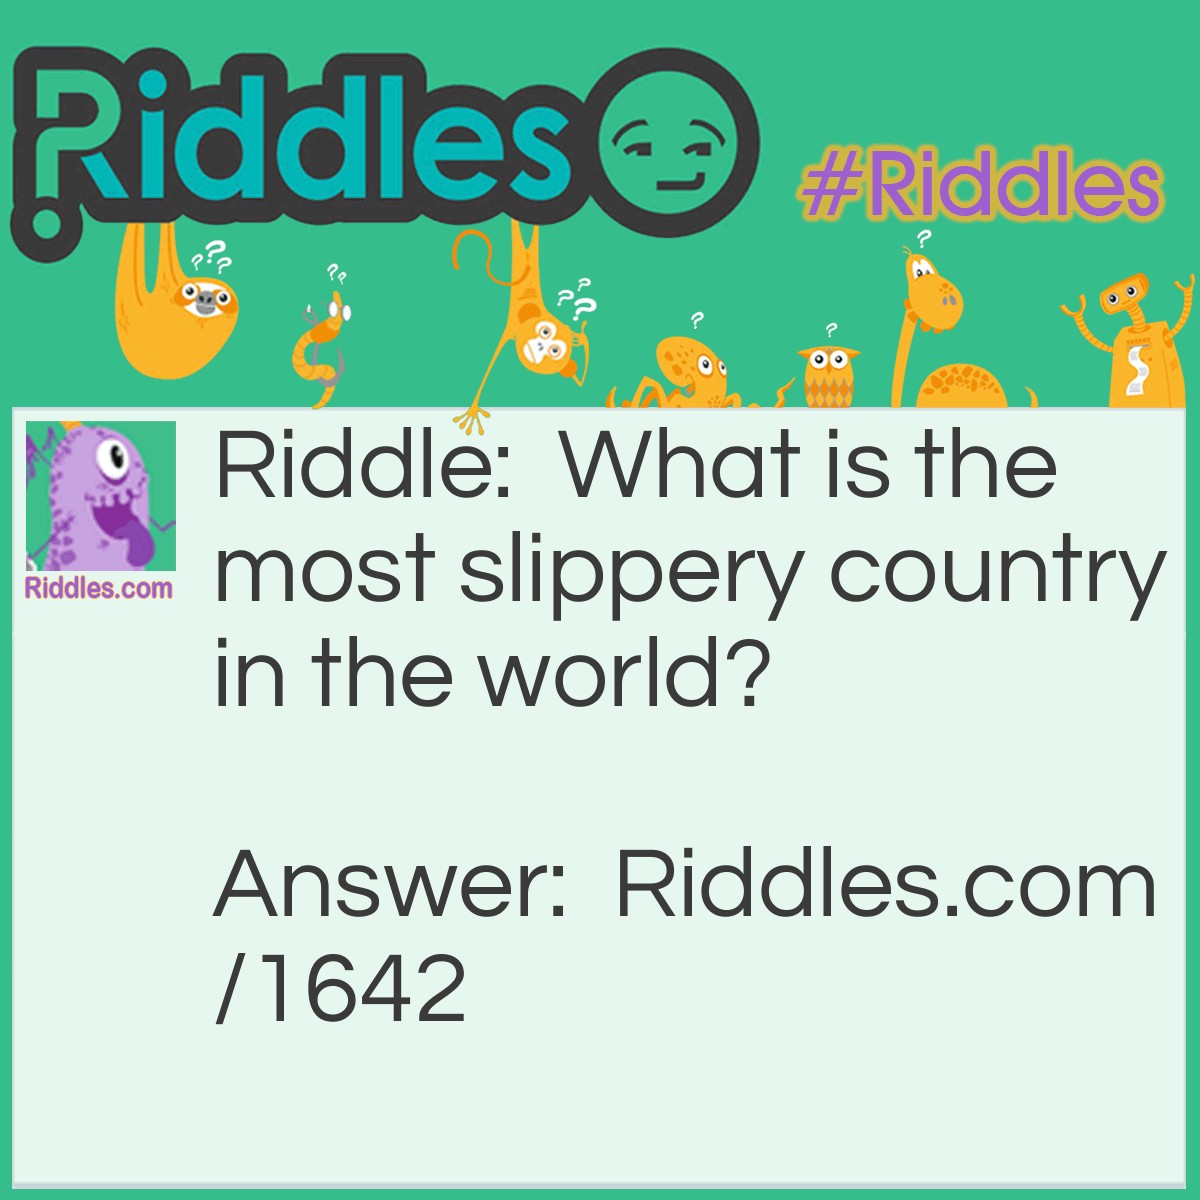 Riddle: What is the most slippery country in the world? Answer: Greece!